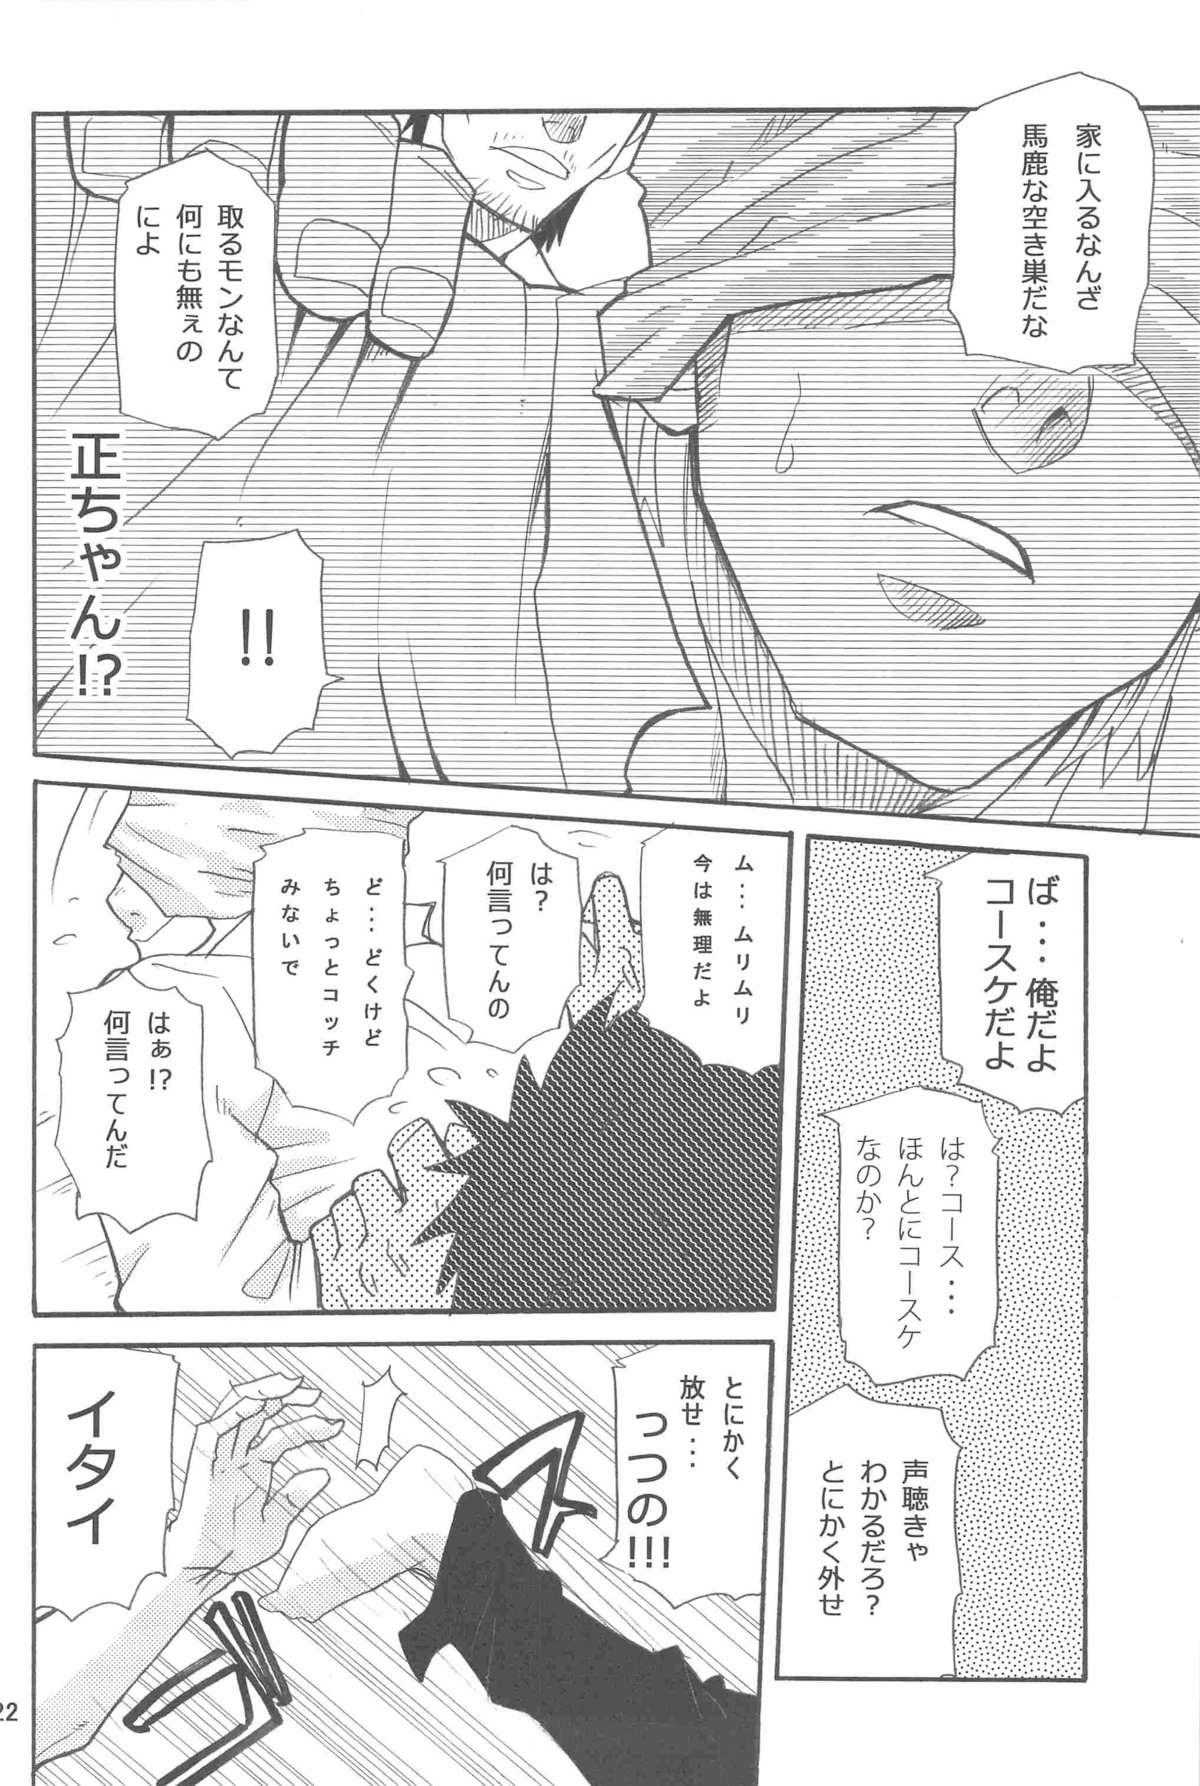 [MATSU Takeshi] More and More of You 5 page 4 full